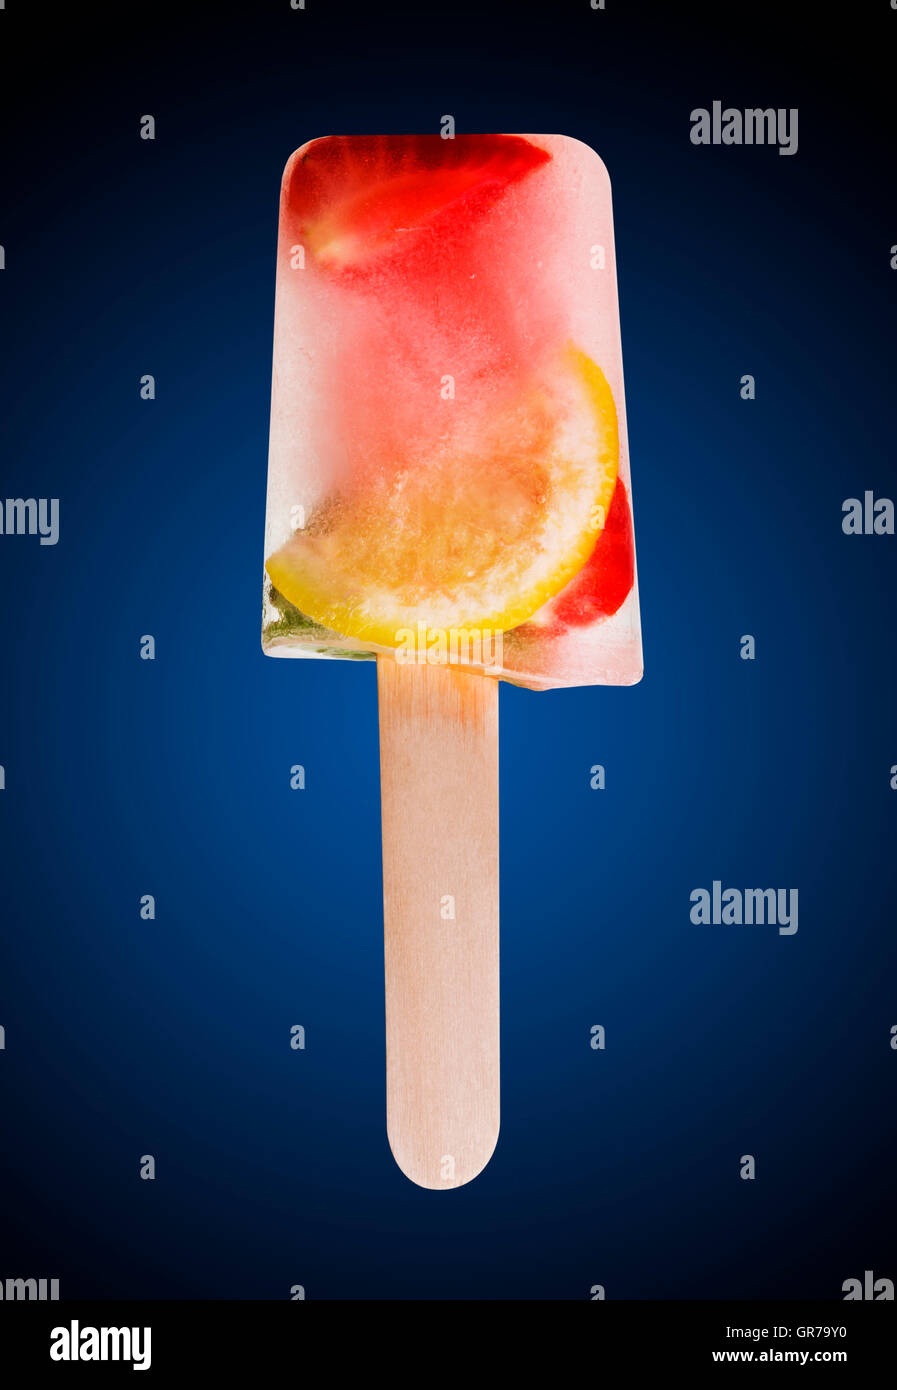 Homemade Popsicle O Ice Lolly With Strawberrys And Lemon Stock Photo